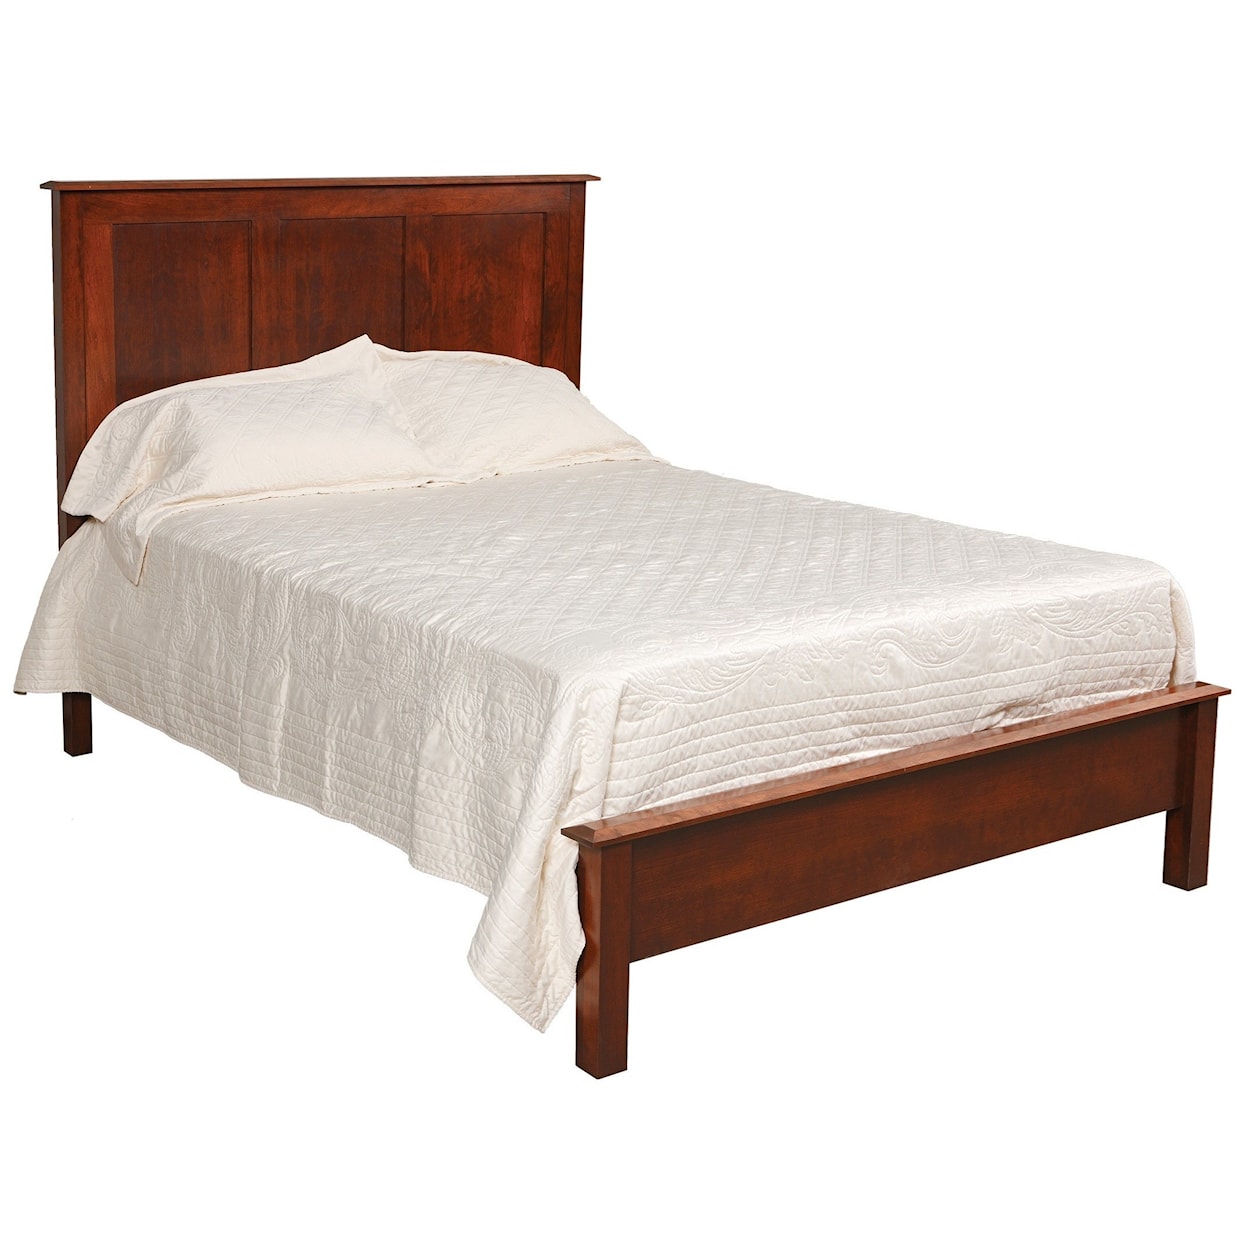 Daniels Amish Manchester Solid Wood California King Bed